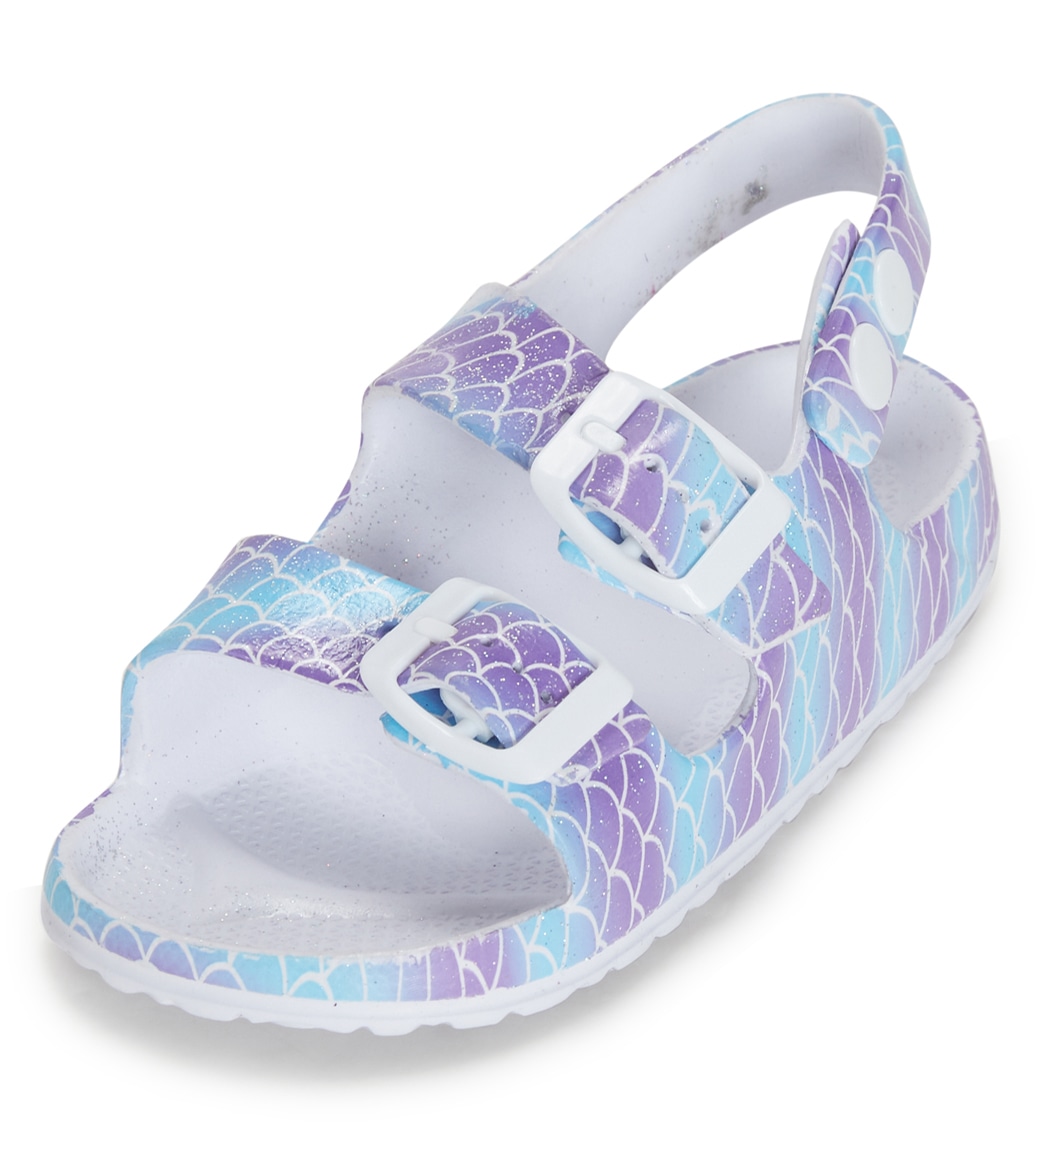 Northside Kid's Tate Slip On Shoes Shoes Sandals Toddler - Purple/Multi 5T - Swimoutlet.com